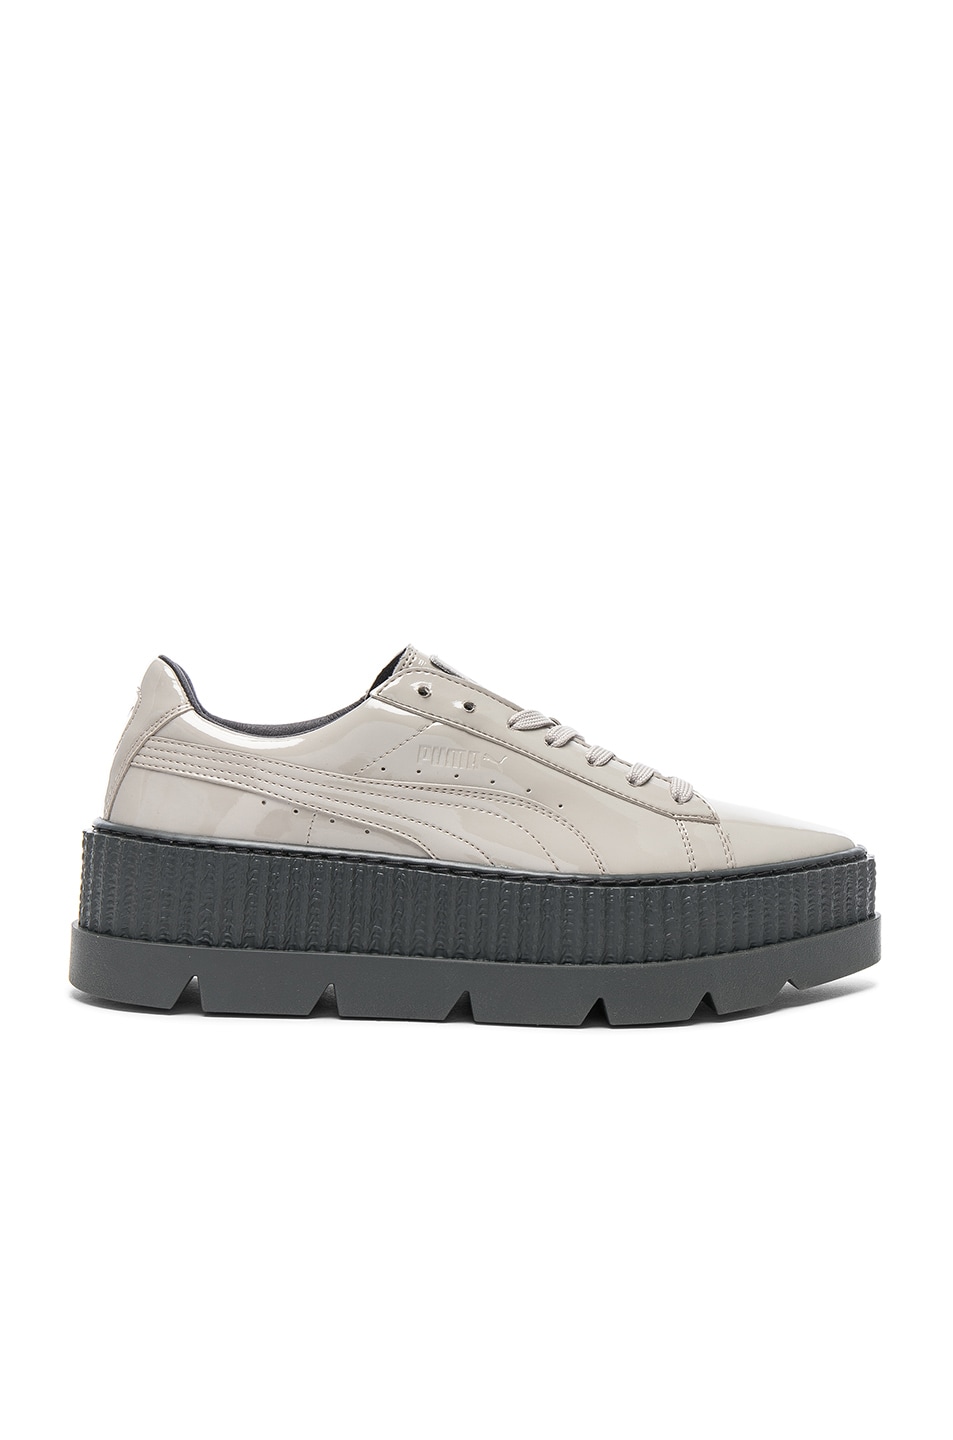 Image 1 of Fenty by Puma Pointy Patent Leather Creeper Sneakers in Dove & Glacier Gray